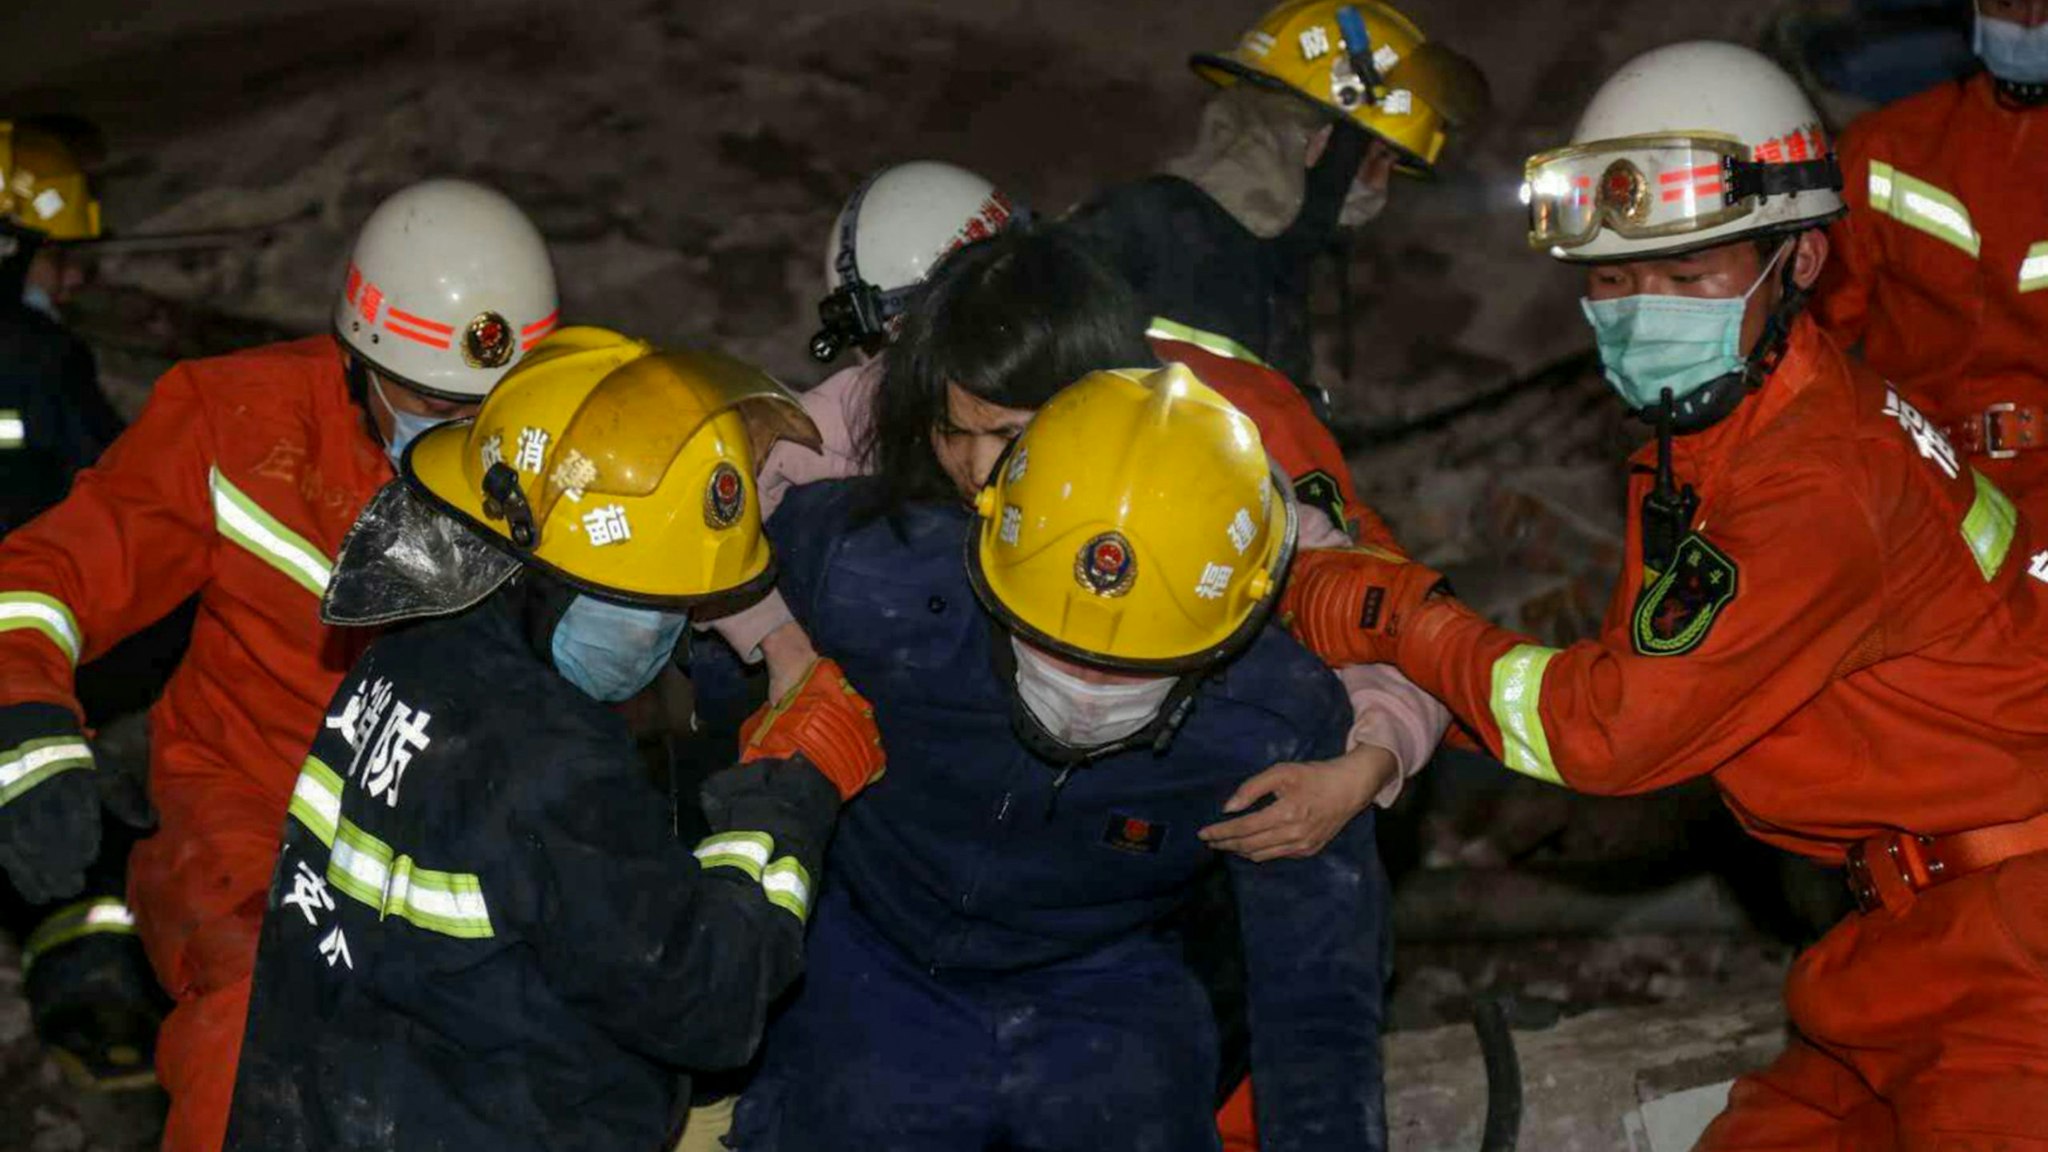 A woman (C on the back) is rescued from the rubble of a collapsed hotel in Quanzhou, in China's eastern Fujian province on March 7, 2020. - Around 70 people were trapped after the Xinjia Hotel collapsed on March 7 evening, officials said.